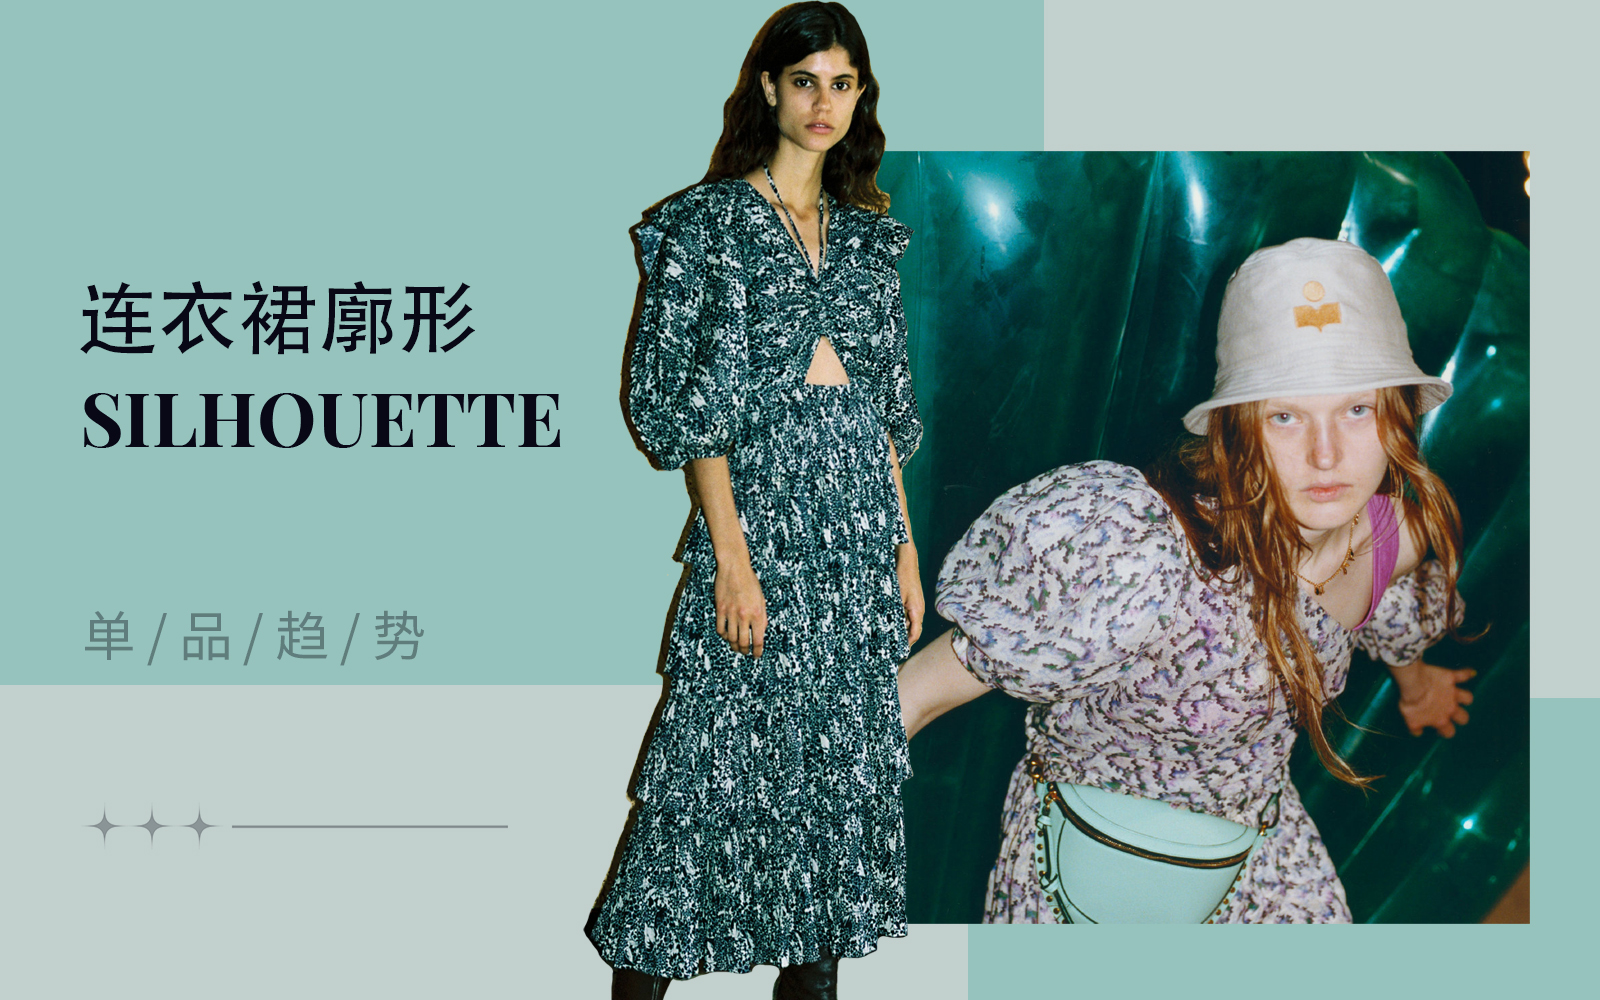 Sweet Romance -- The Silhouette Trend for Women's Dress